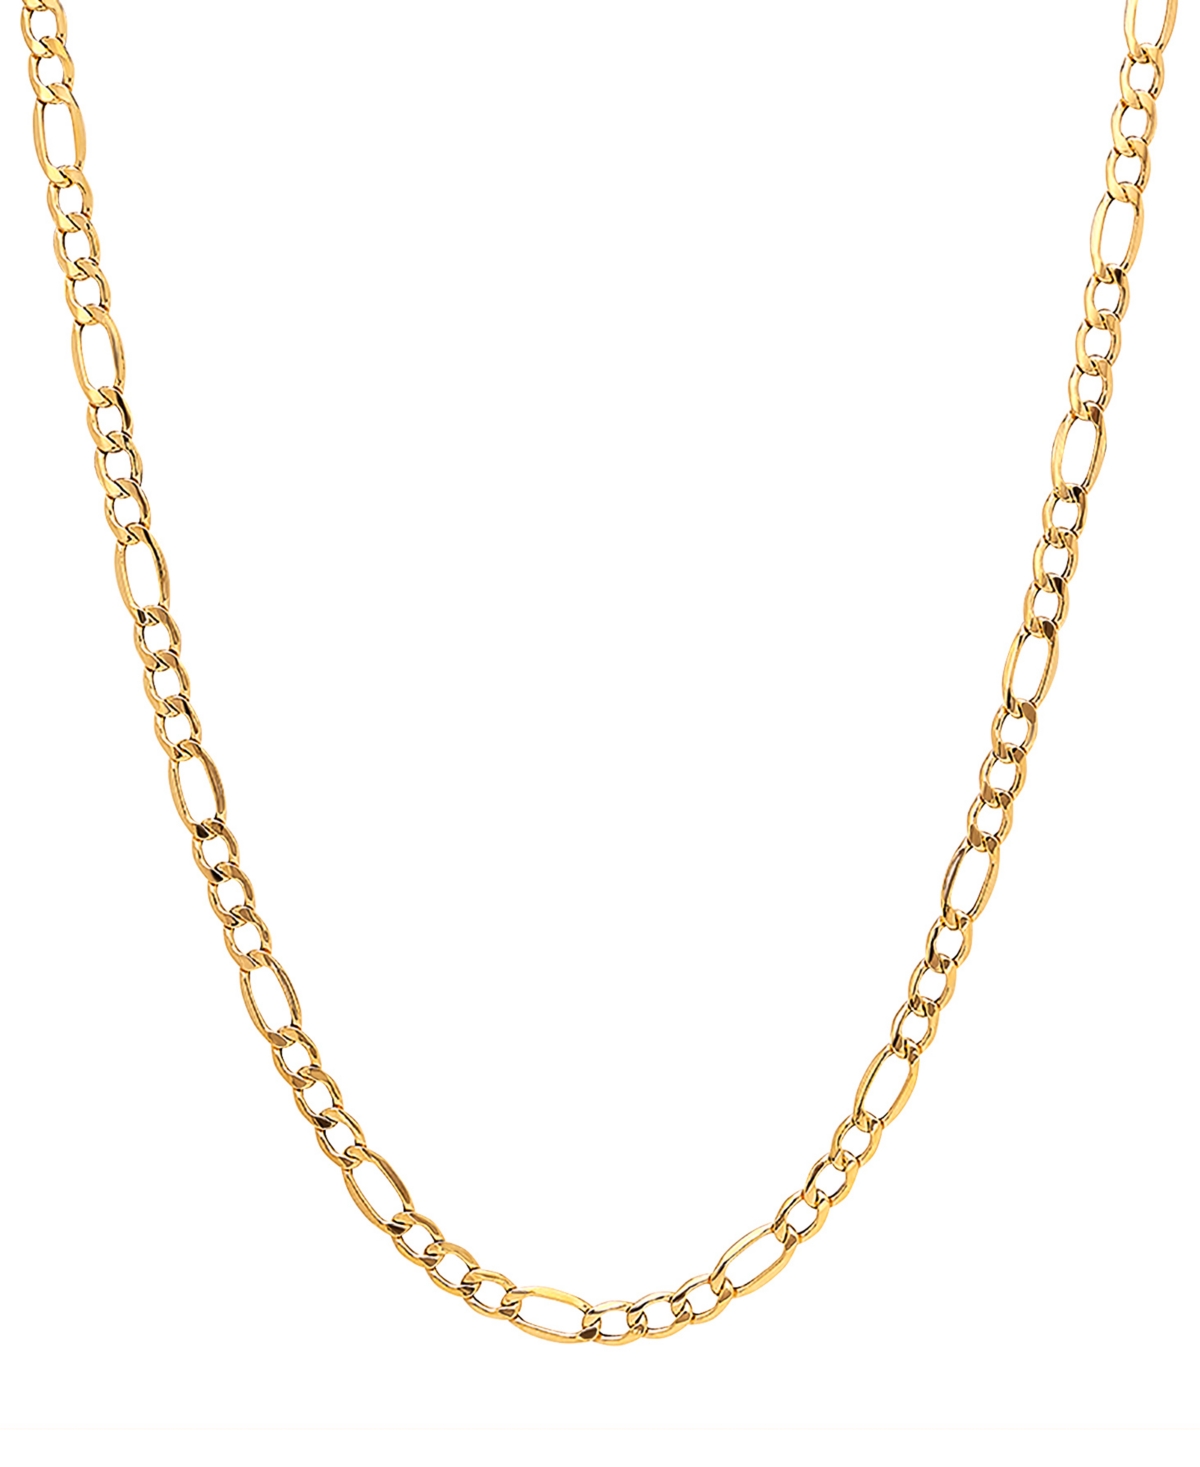 20" Figaro Link (5-3/4mm) Chain Necklace in 14k Gold - Yellow Gold